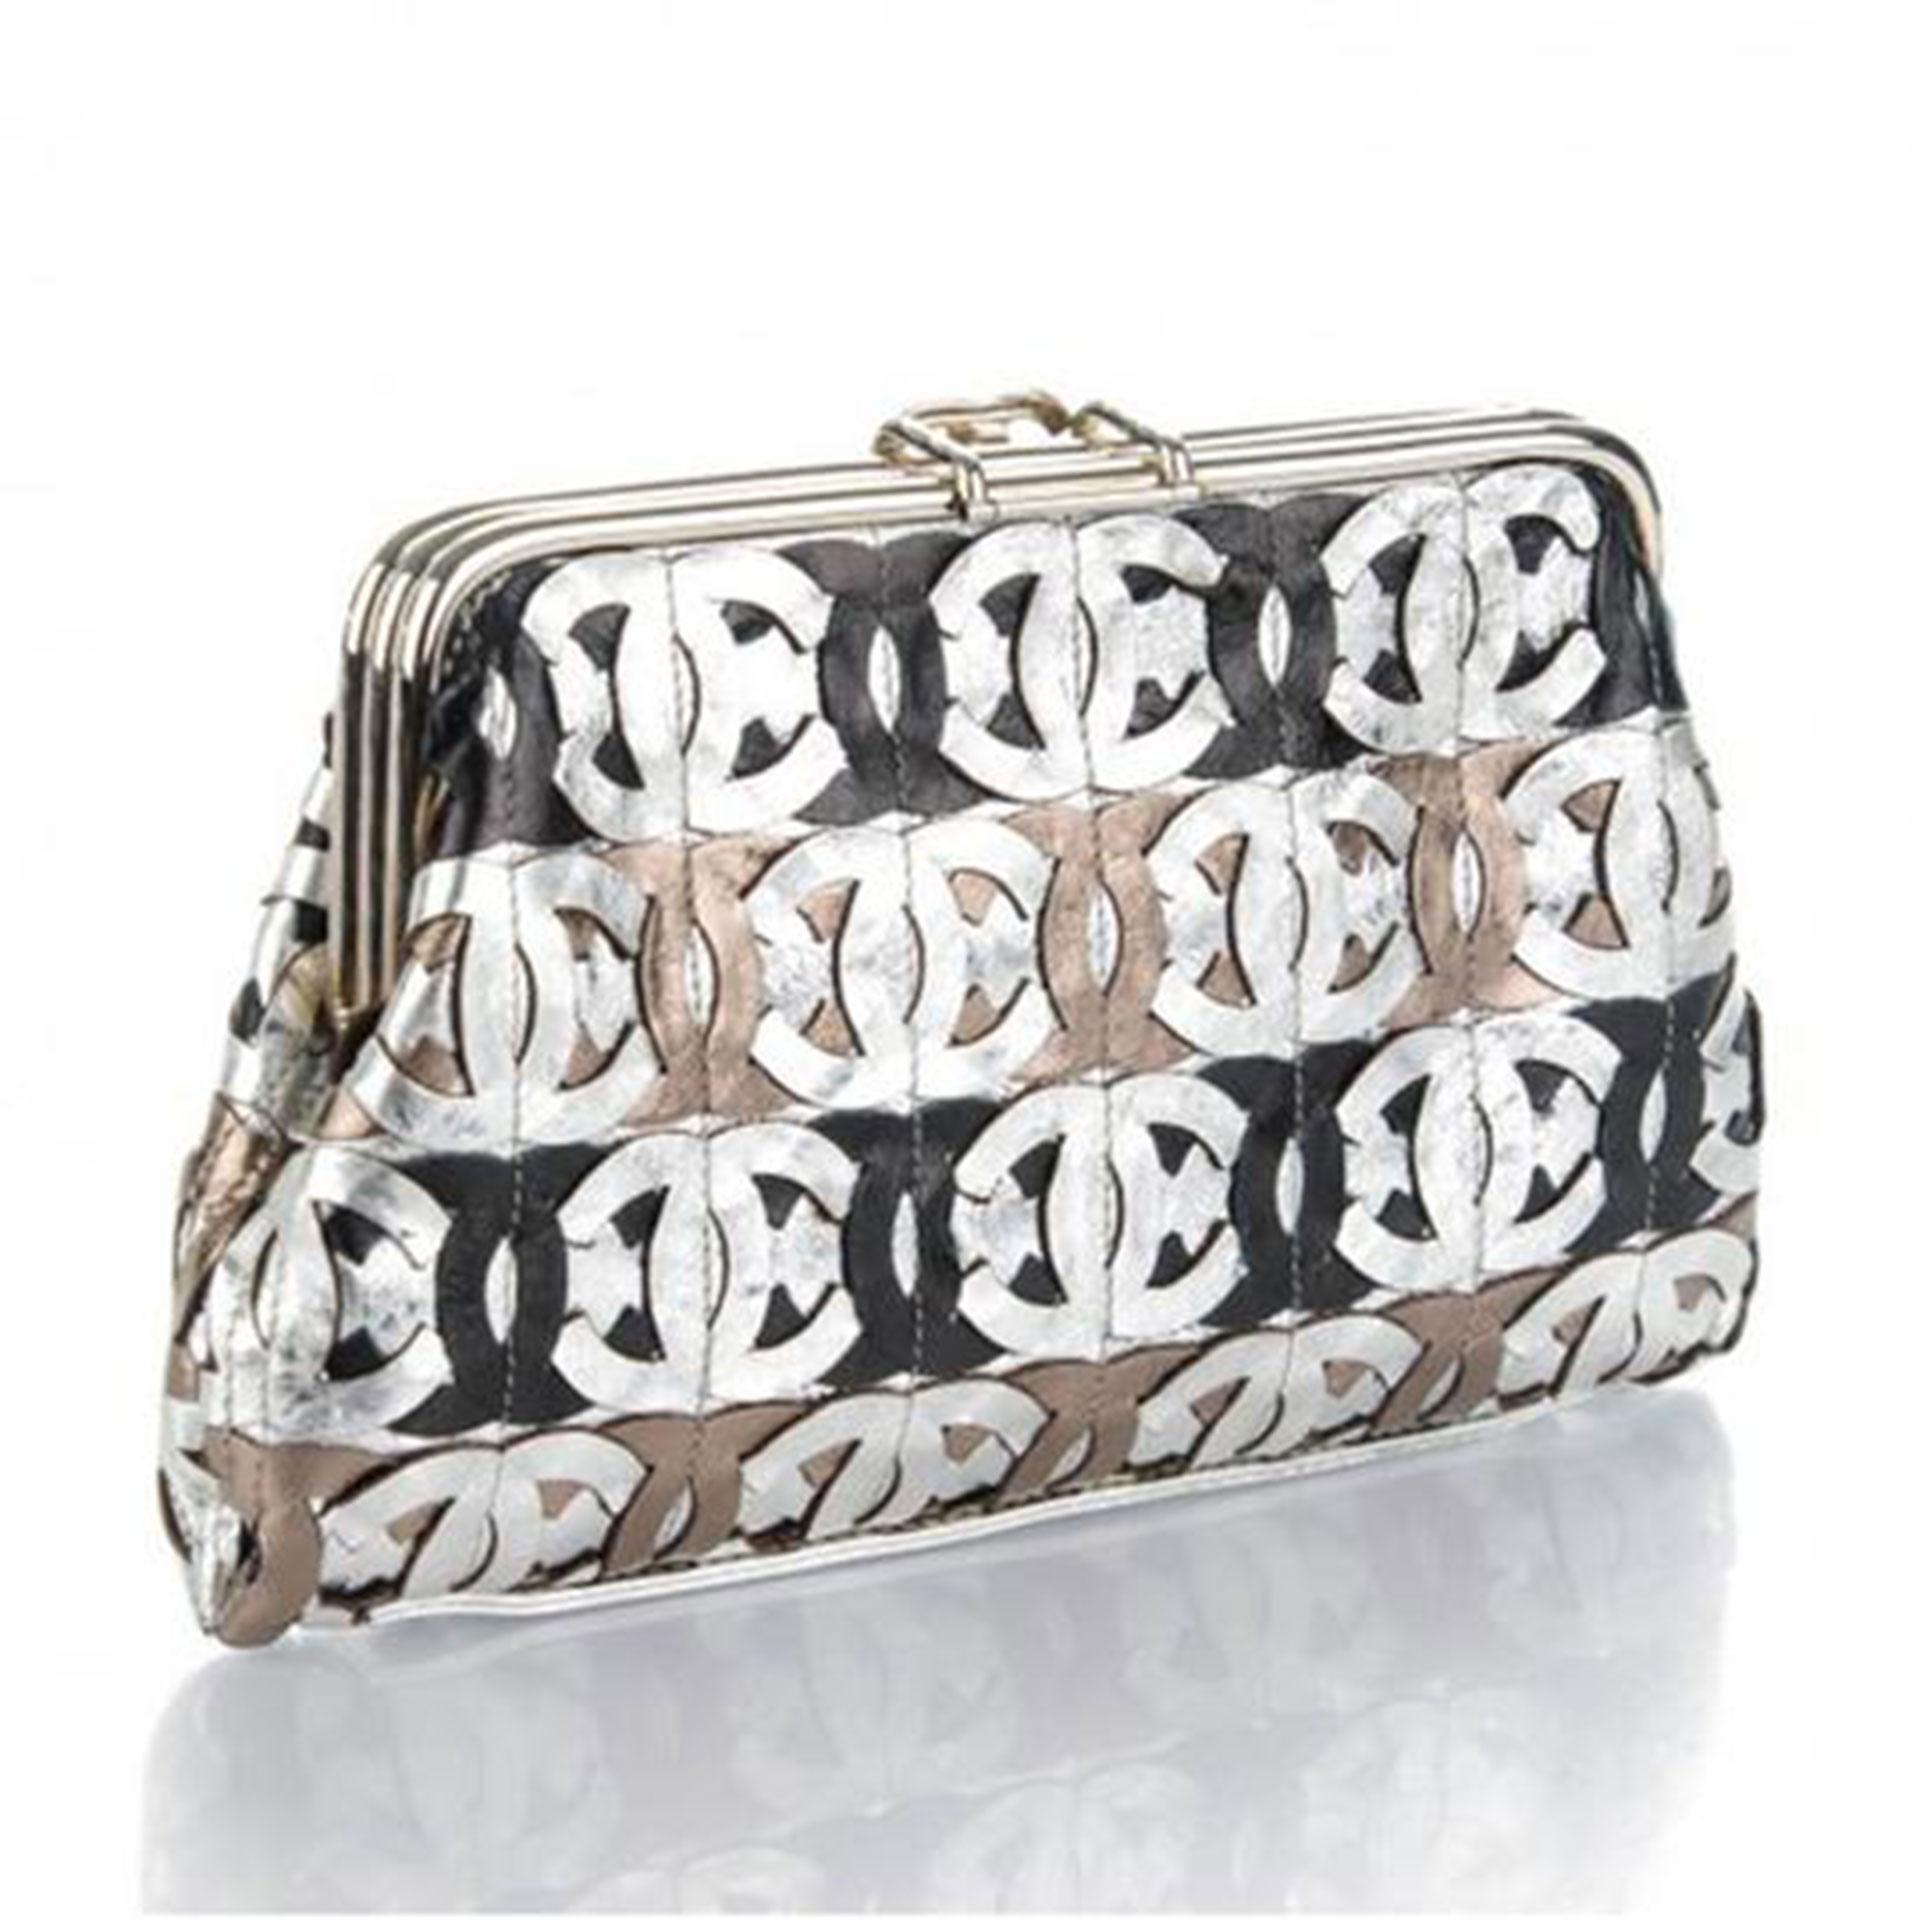 Chanel 2008 Runway Limited Edition Laser CC Metallic Silver Bronze Gold Clutch For Sale 4